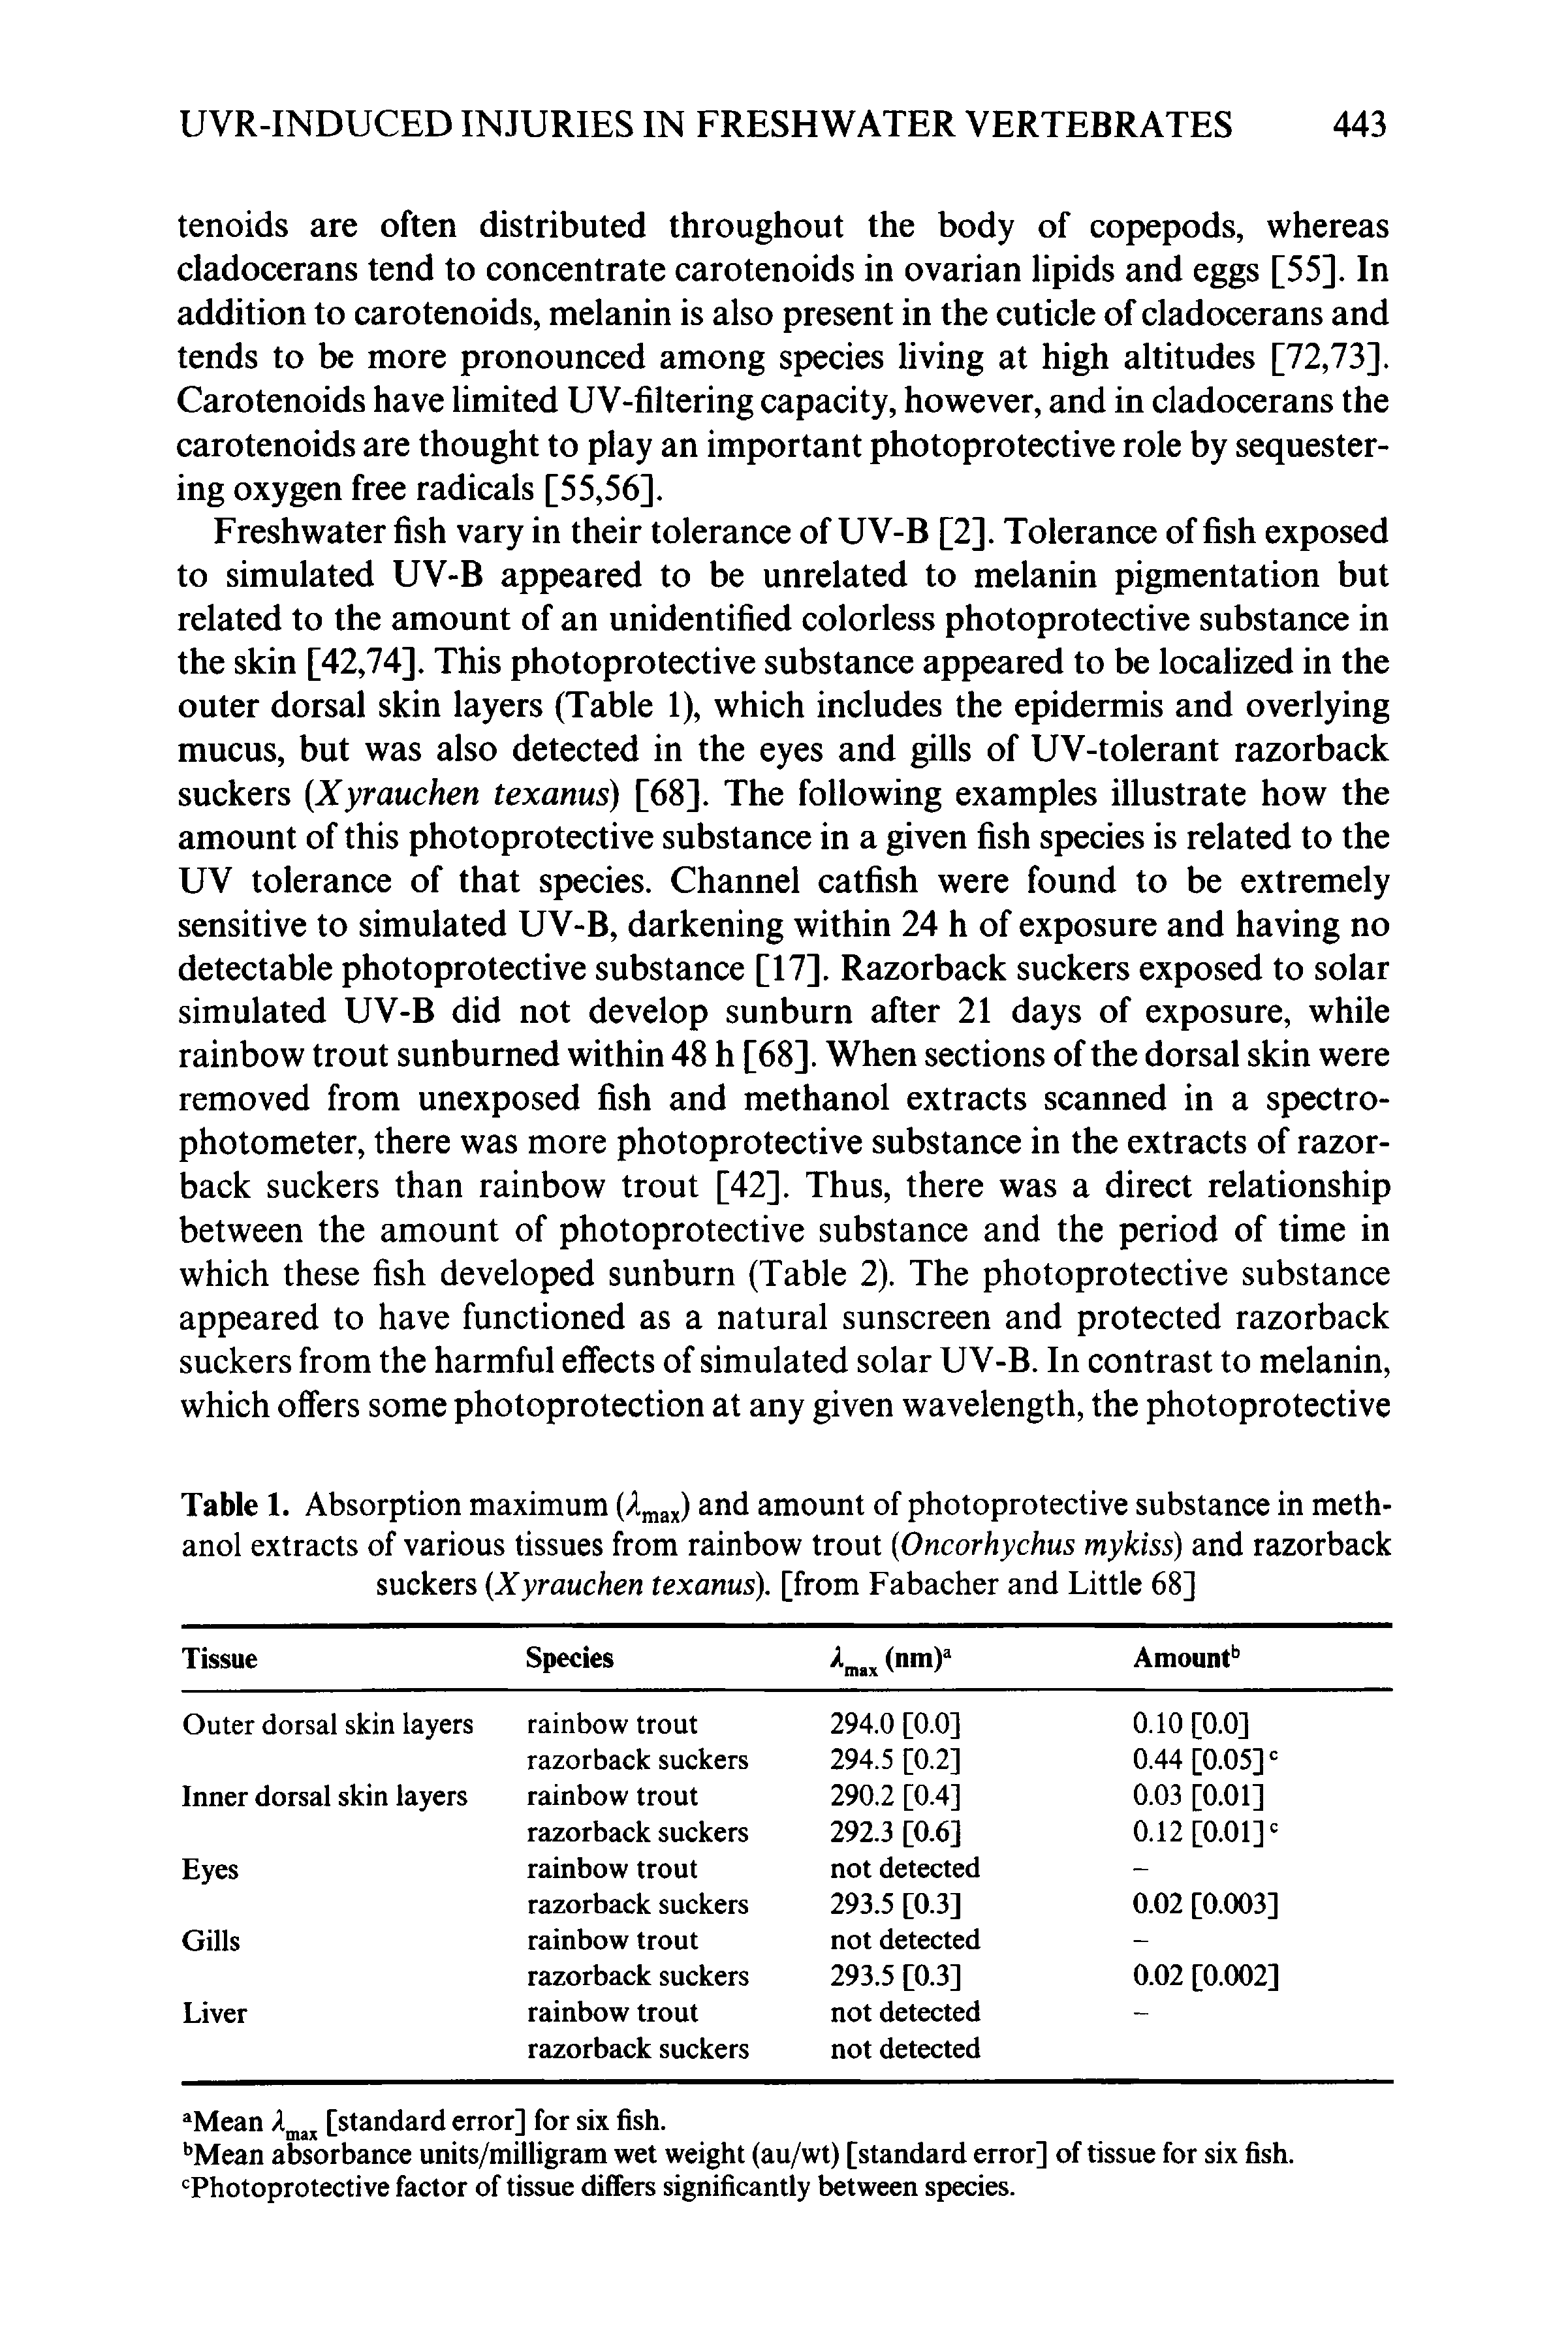 Table 1. Absorption maximum (A ax) amount of photoprotective substance in methanol extracts of various tissues from rainbow trout Oncorhychus mykiss) and razorback suckers Xyrauchen texanus). [from Fabacher and Little 68]...